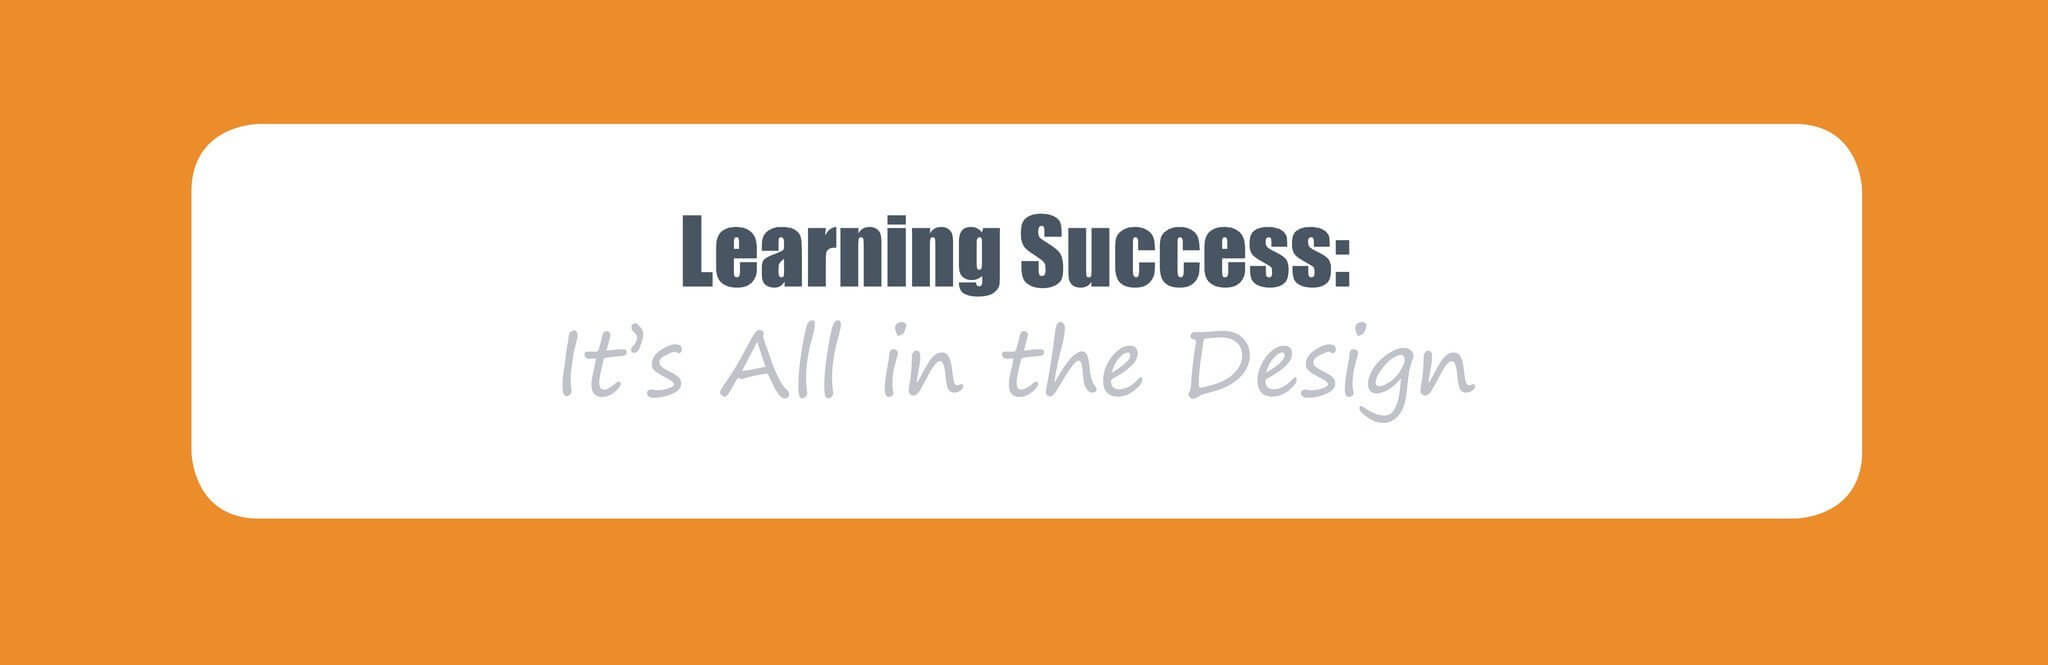 Infographic: Learning Success - It's All in the Design